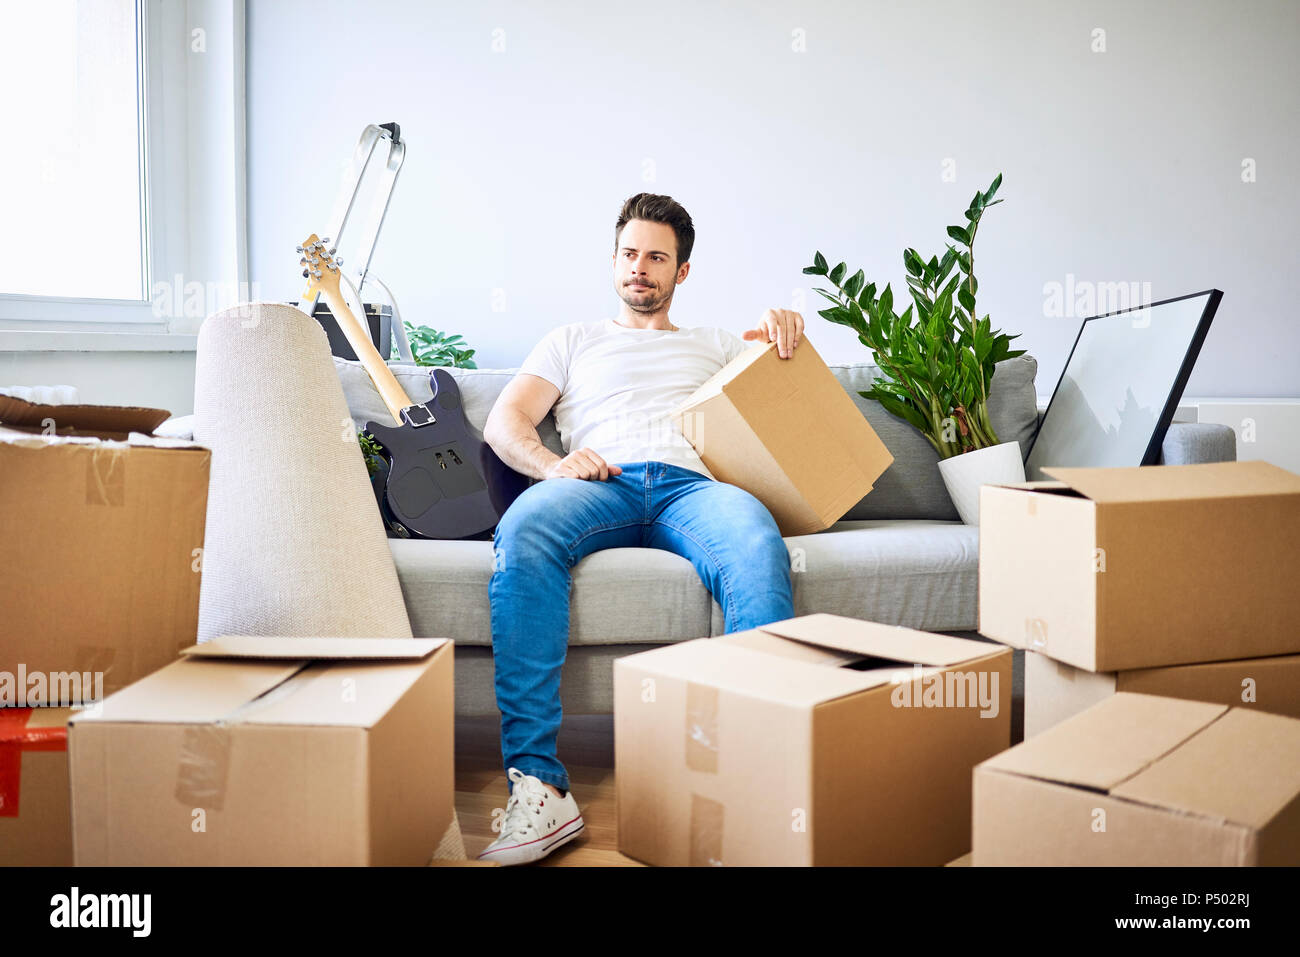 Frustrated man sitting on couch surrounded by cardboard boxes Stock Photo